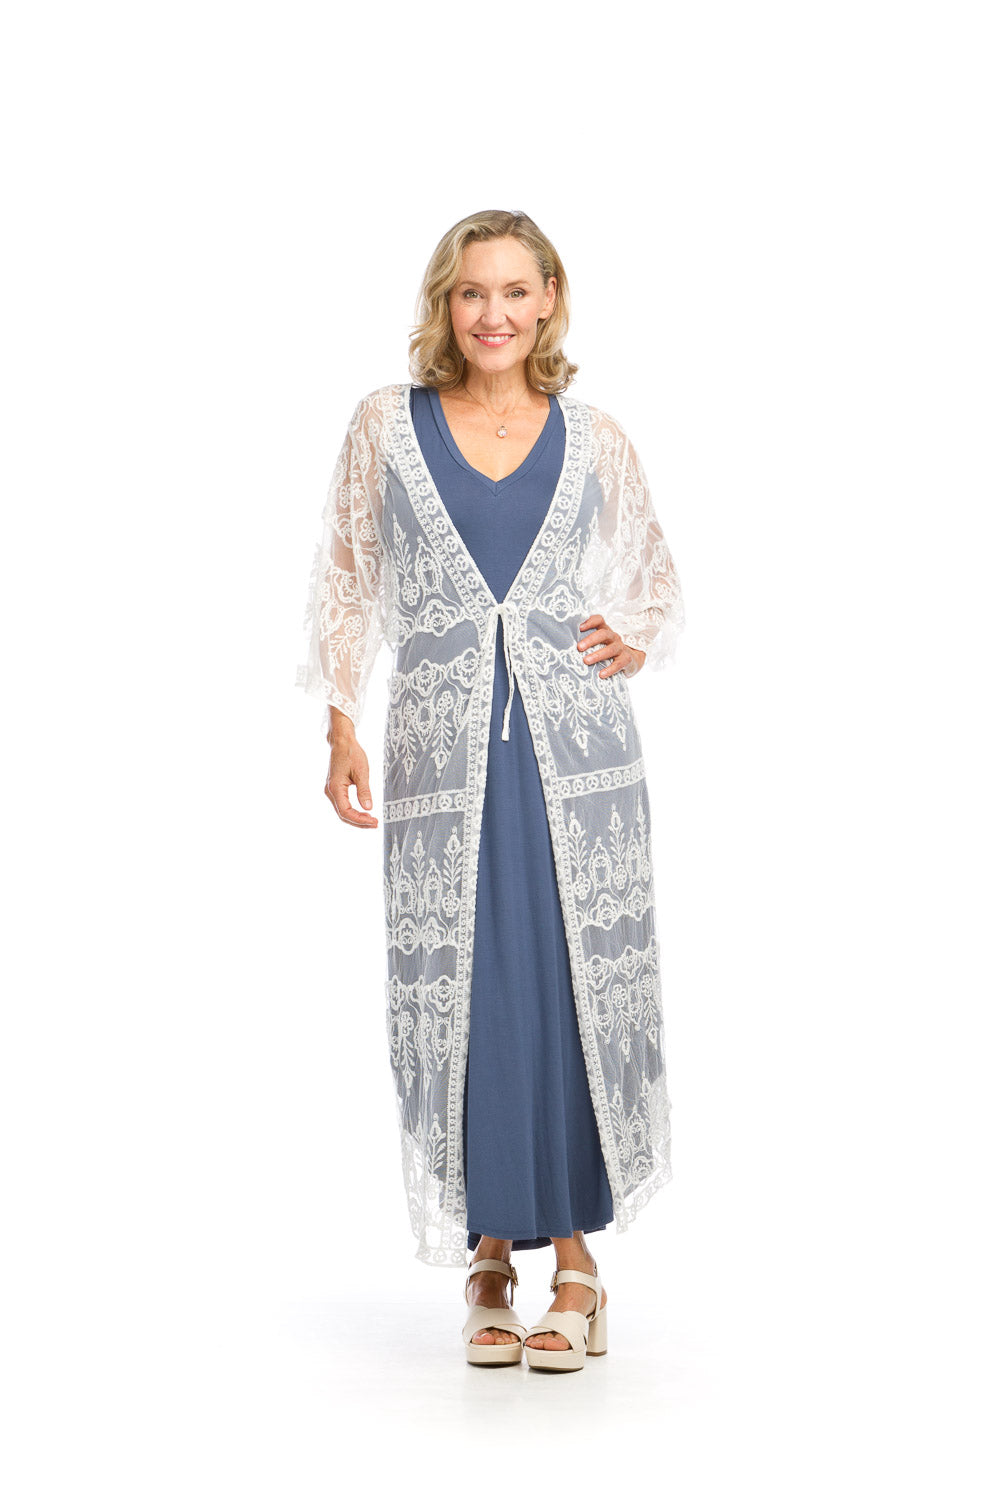 PT16032 WHITE Embroidered Floral Duster with Tie